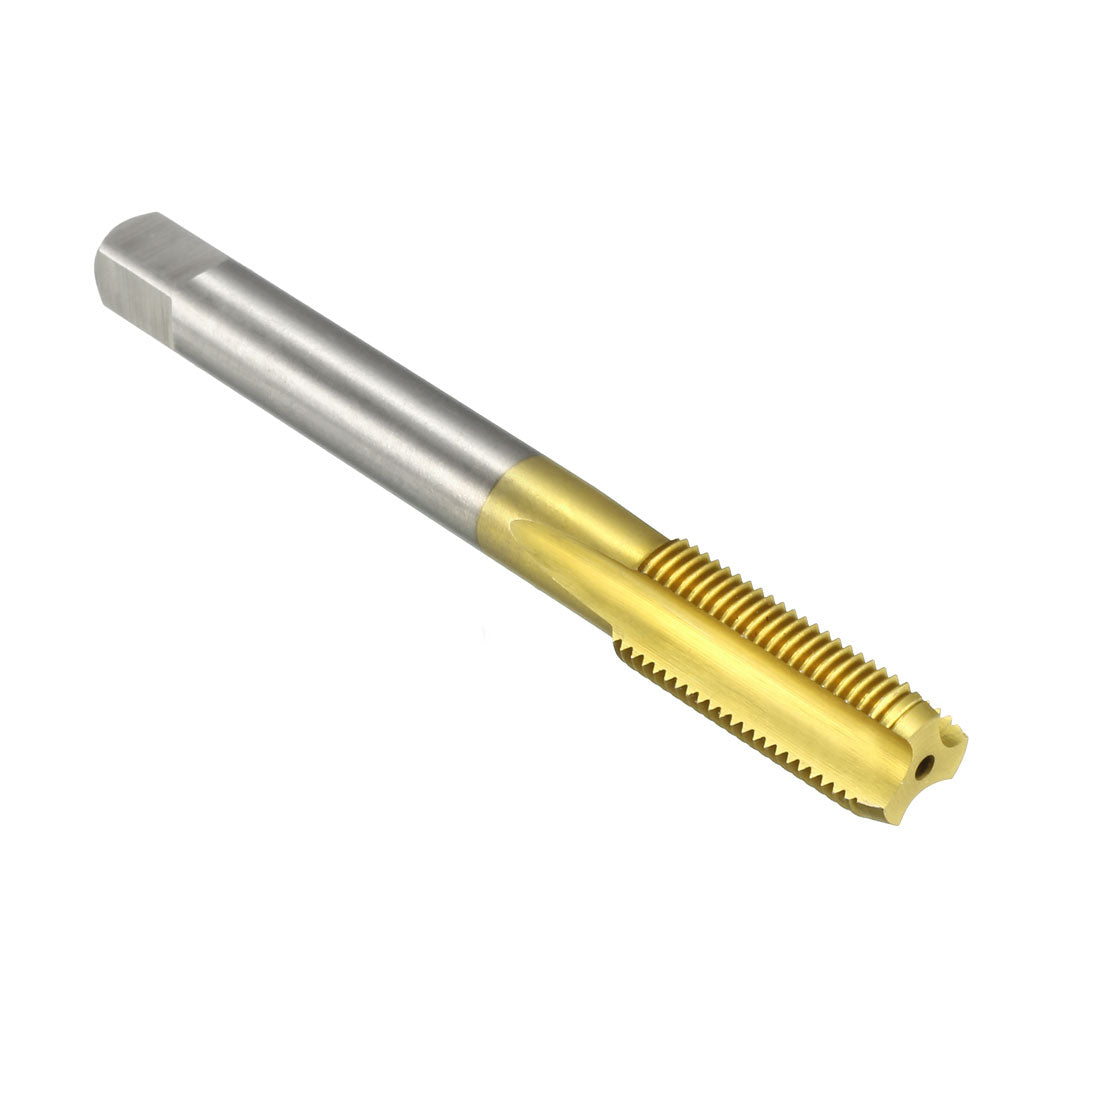 uxcell Uxcell Metric Tap M10 x 1 H2 Right Hand Thread Plug Ti-coated for Threading Tapping